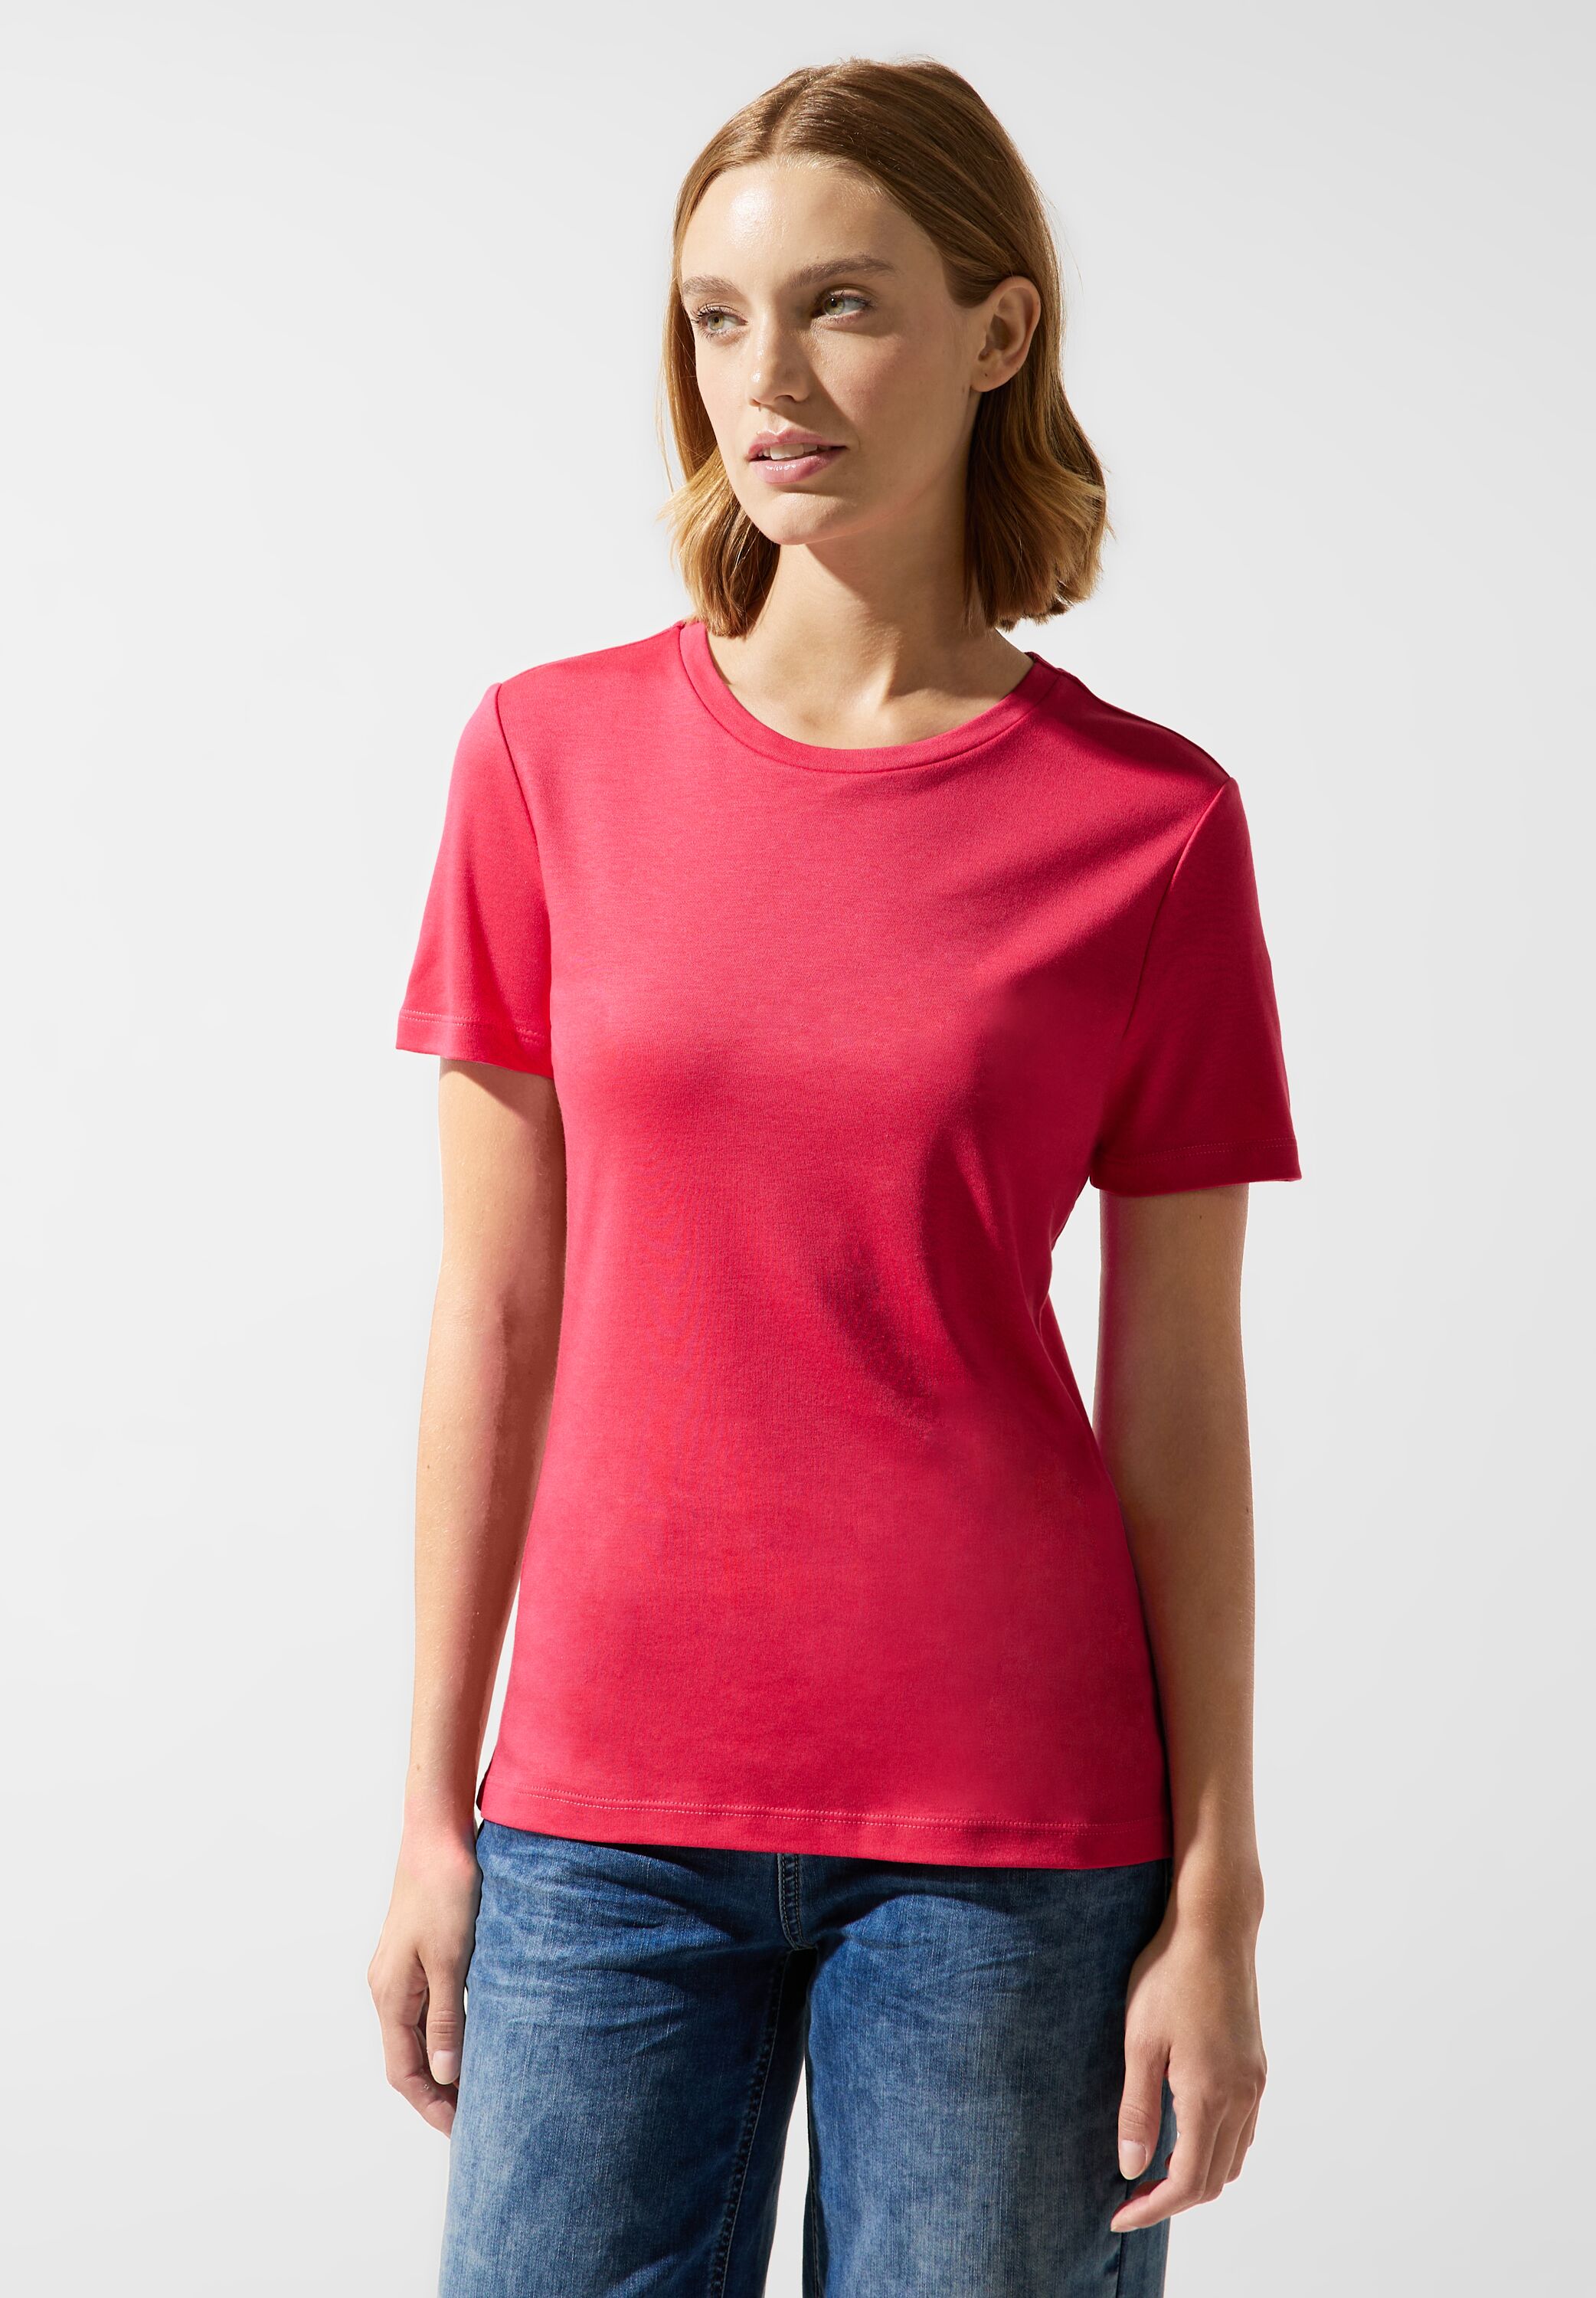 Street One T-Shirt in Coral Blossom im SALE reduziert A320321-15190 -  CONCEPT Mode